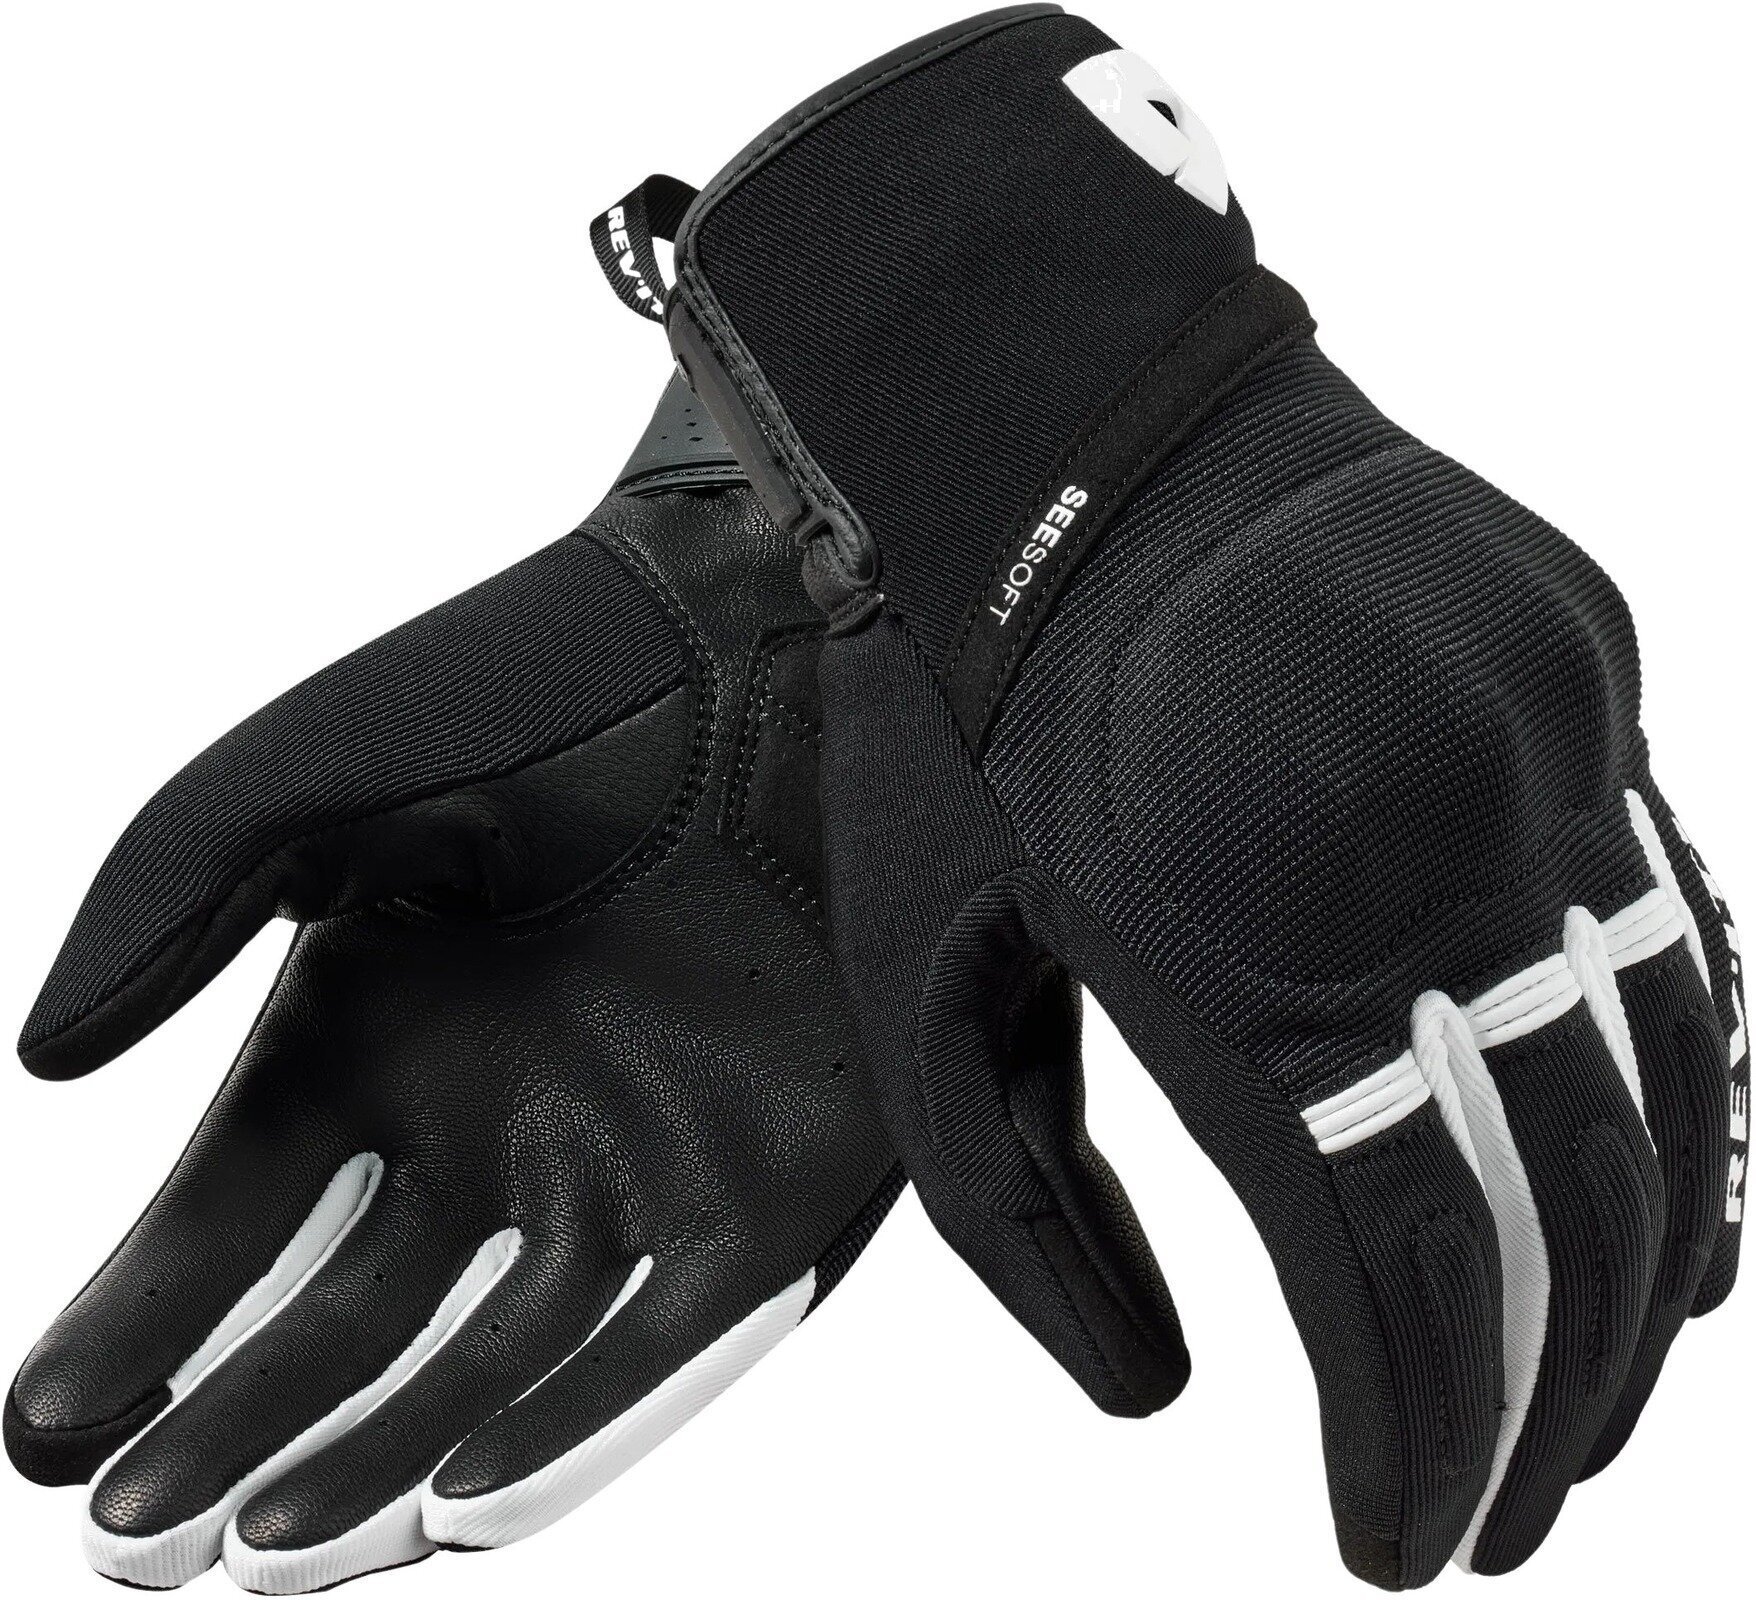 Motorcycle Gloves Rev'it! Gloves Mosca 2 Black/White 2XL Motorcycle Gloves